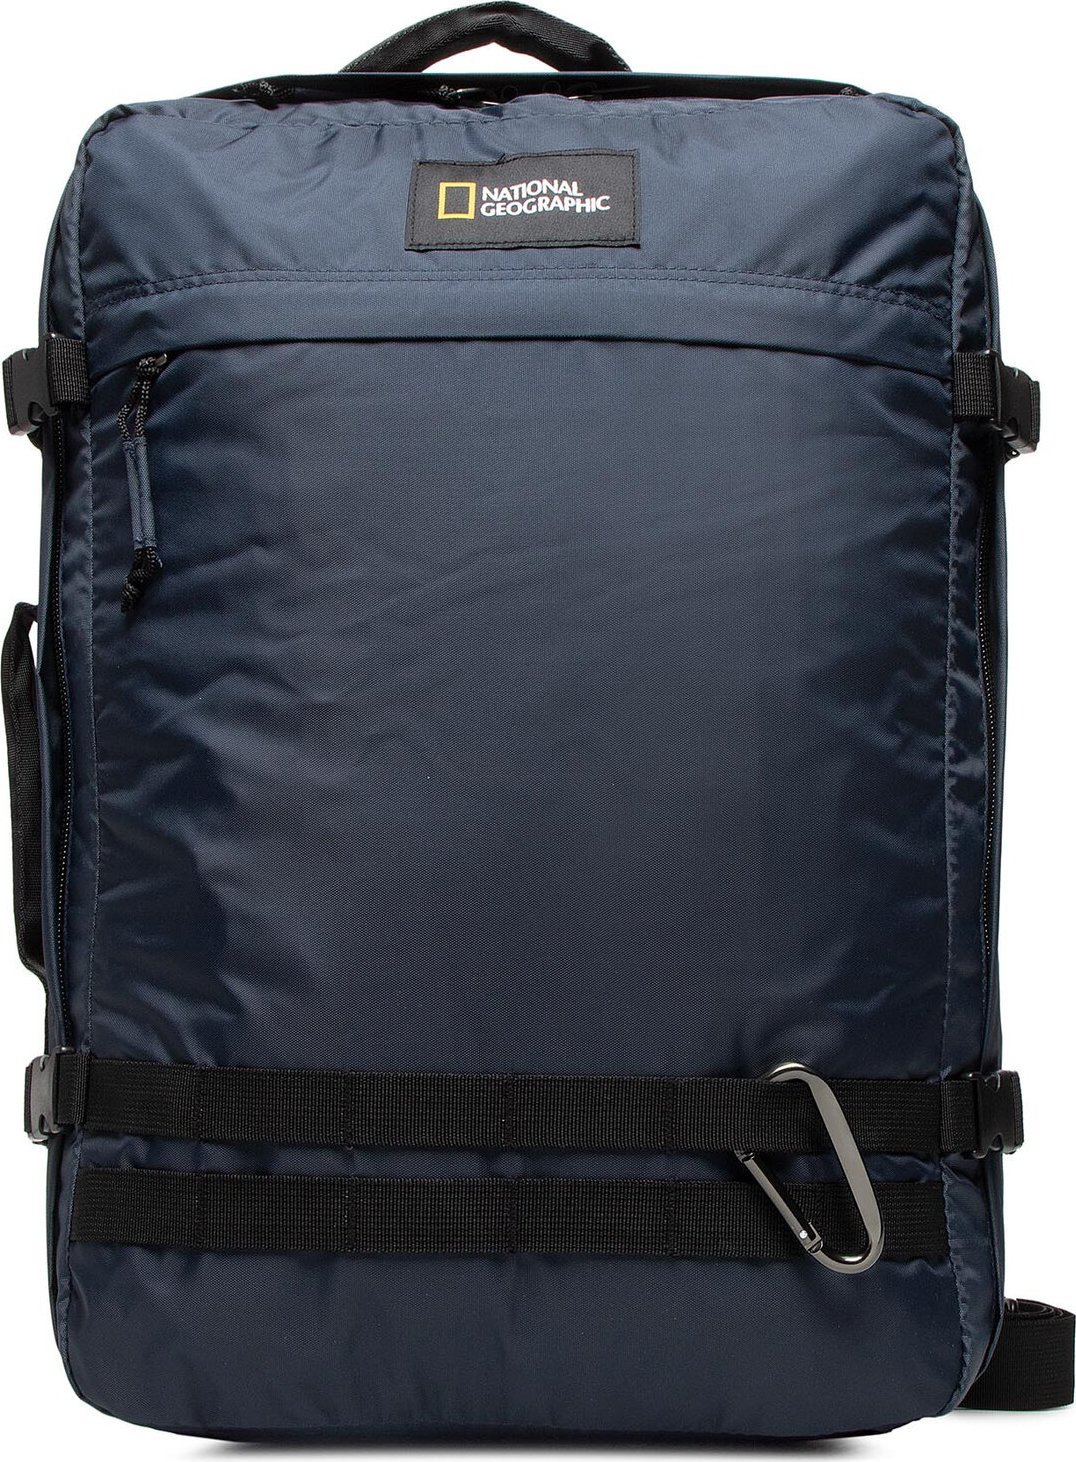 Batoh National Geographic 3 Way Backpack N11801.49 Navy